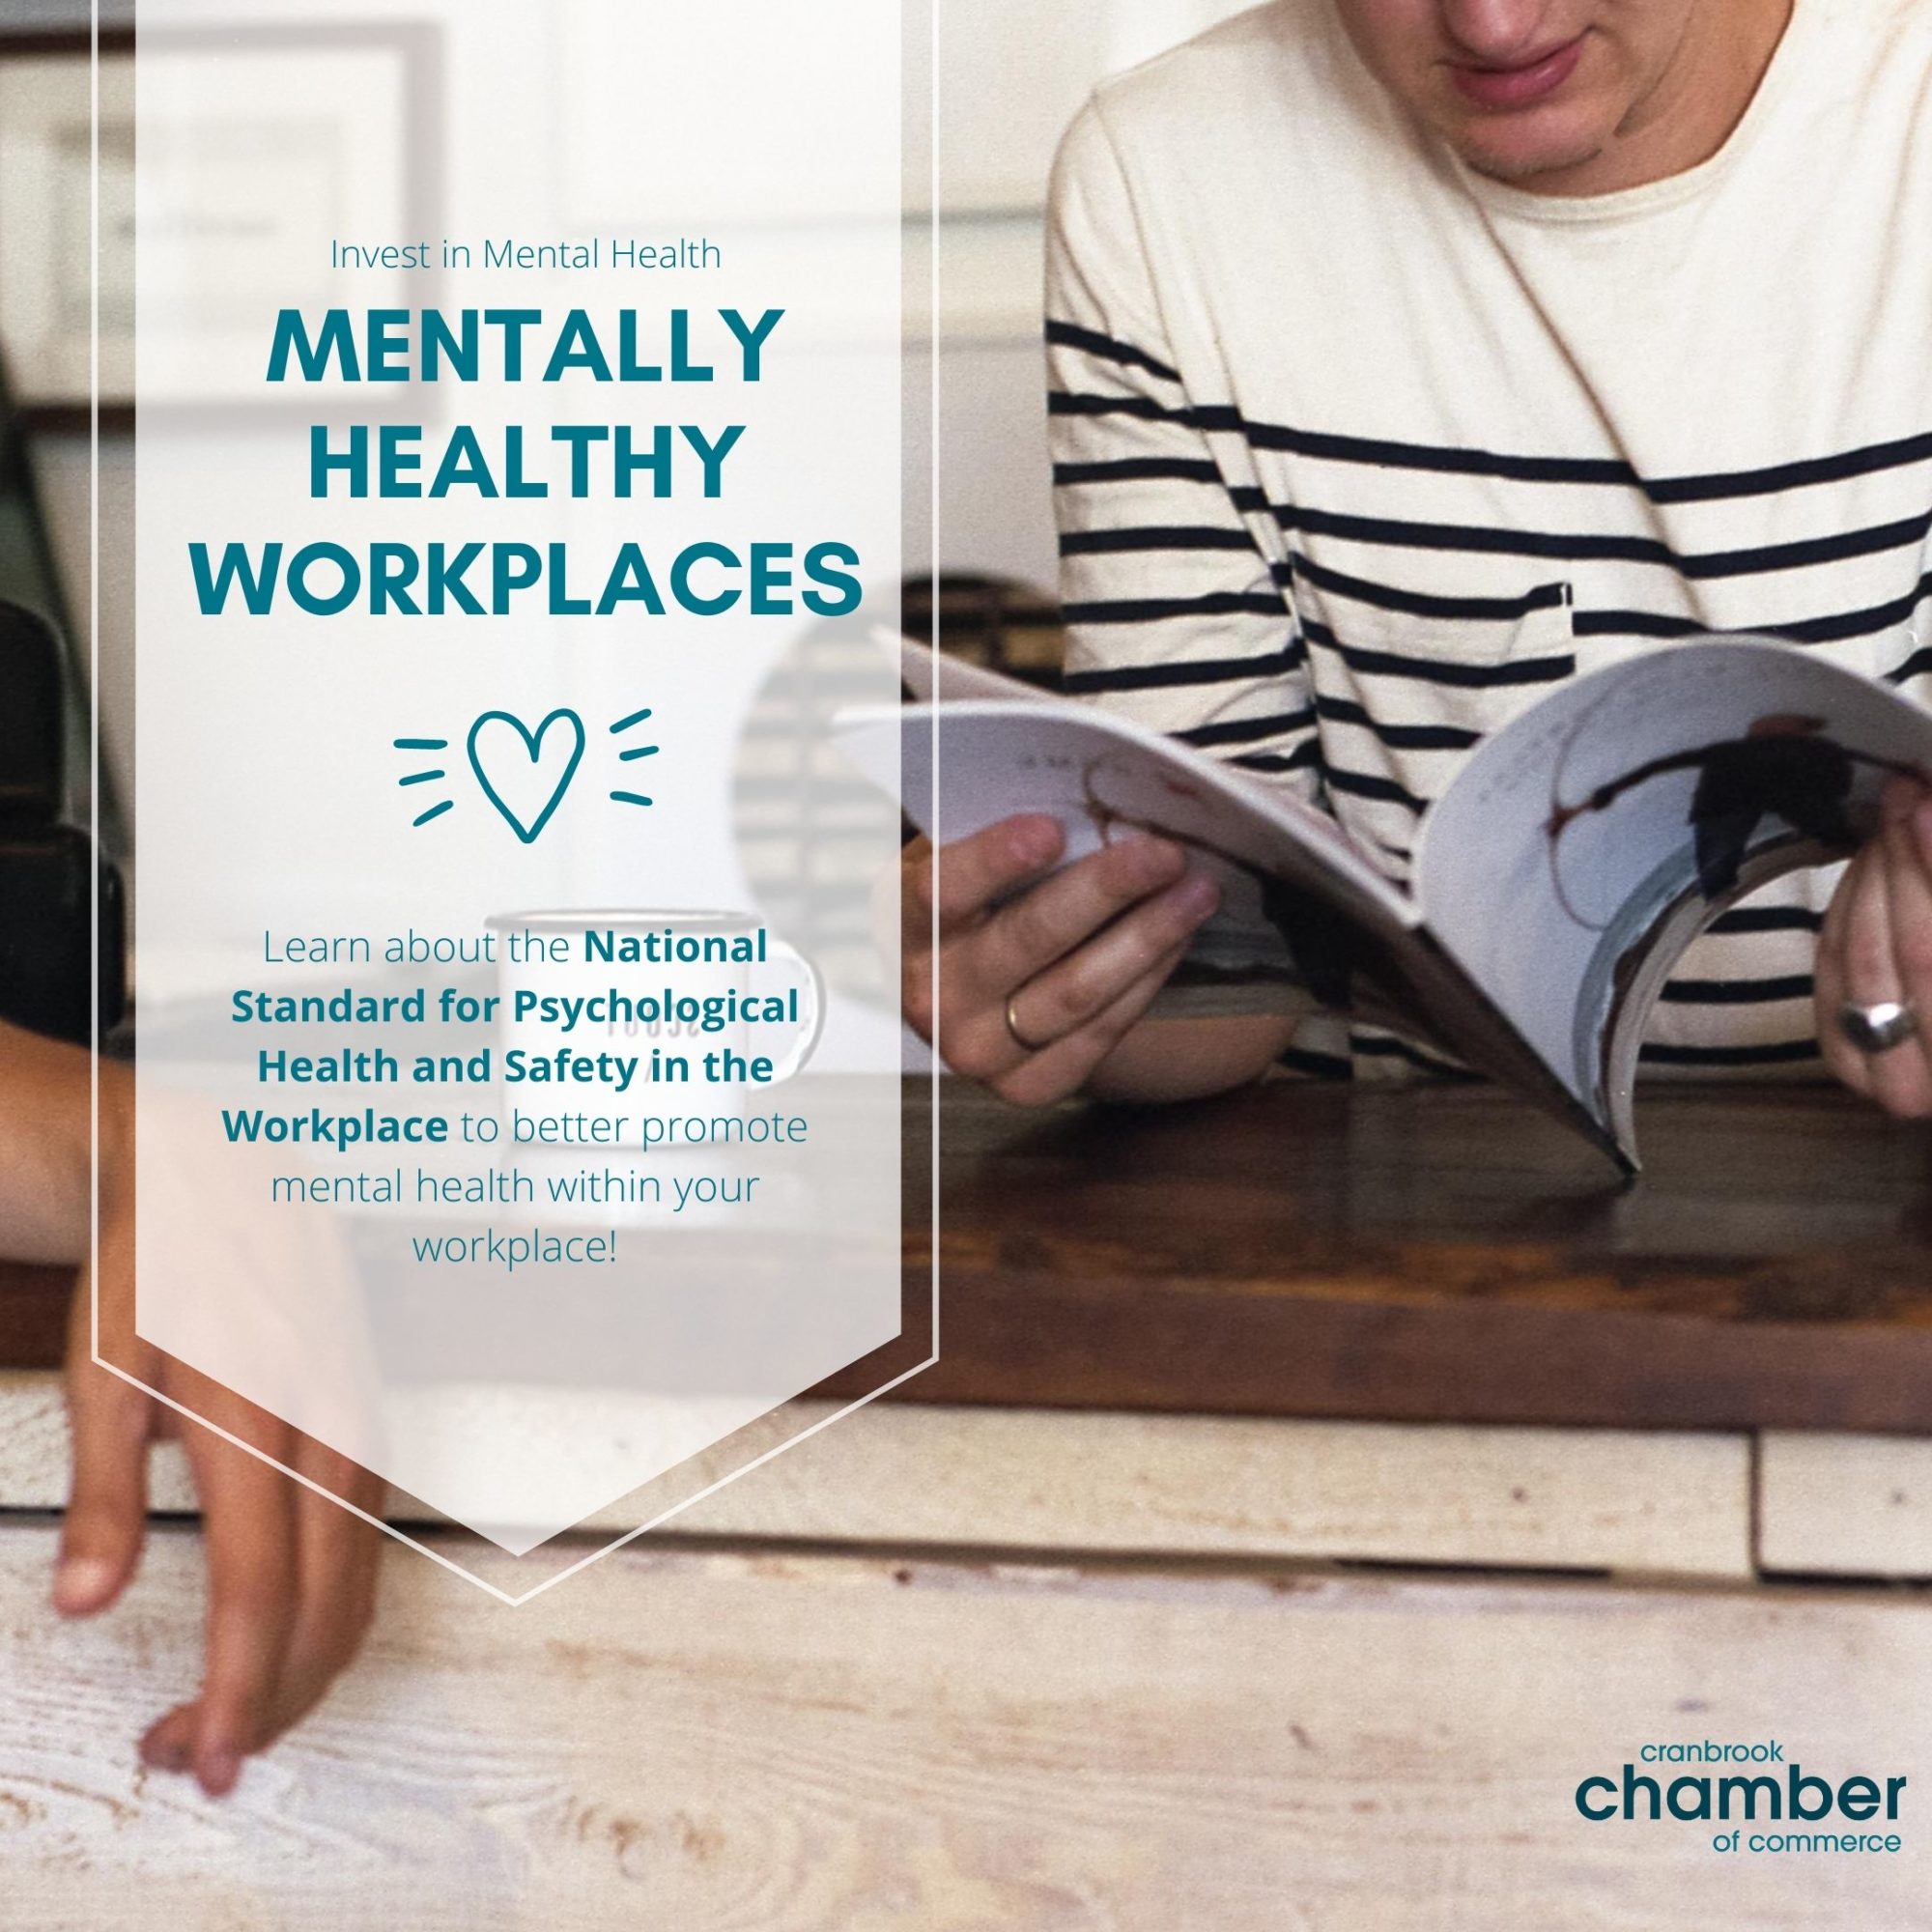 Mentally Healthy Workplaces - Cranbrook Chamber of Commerce